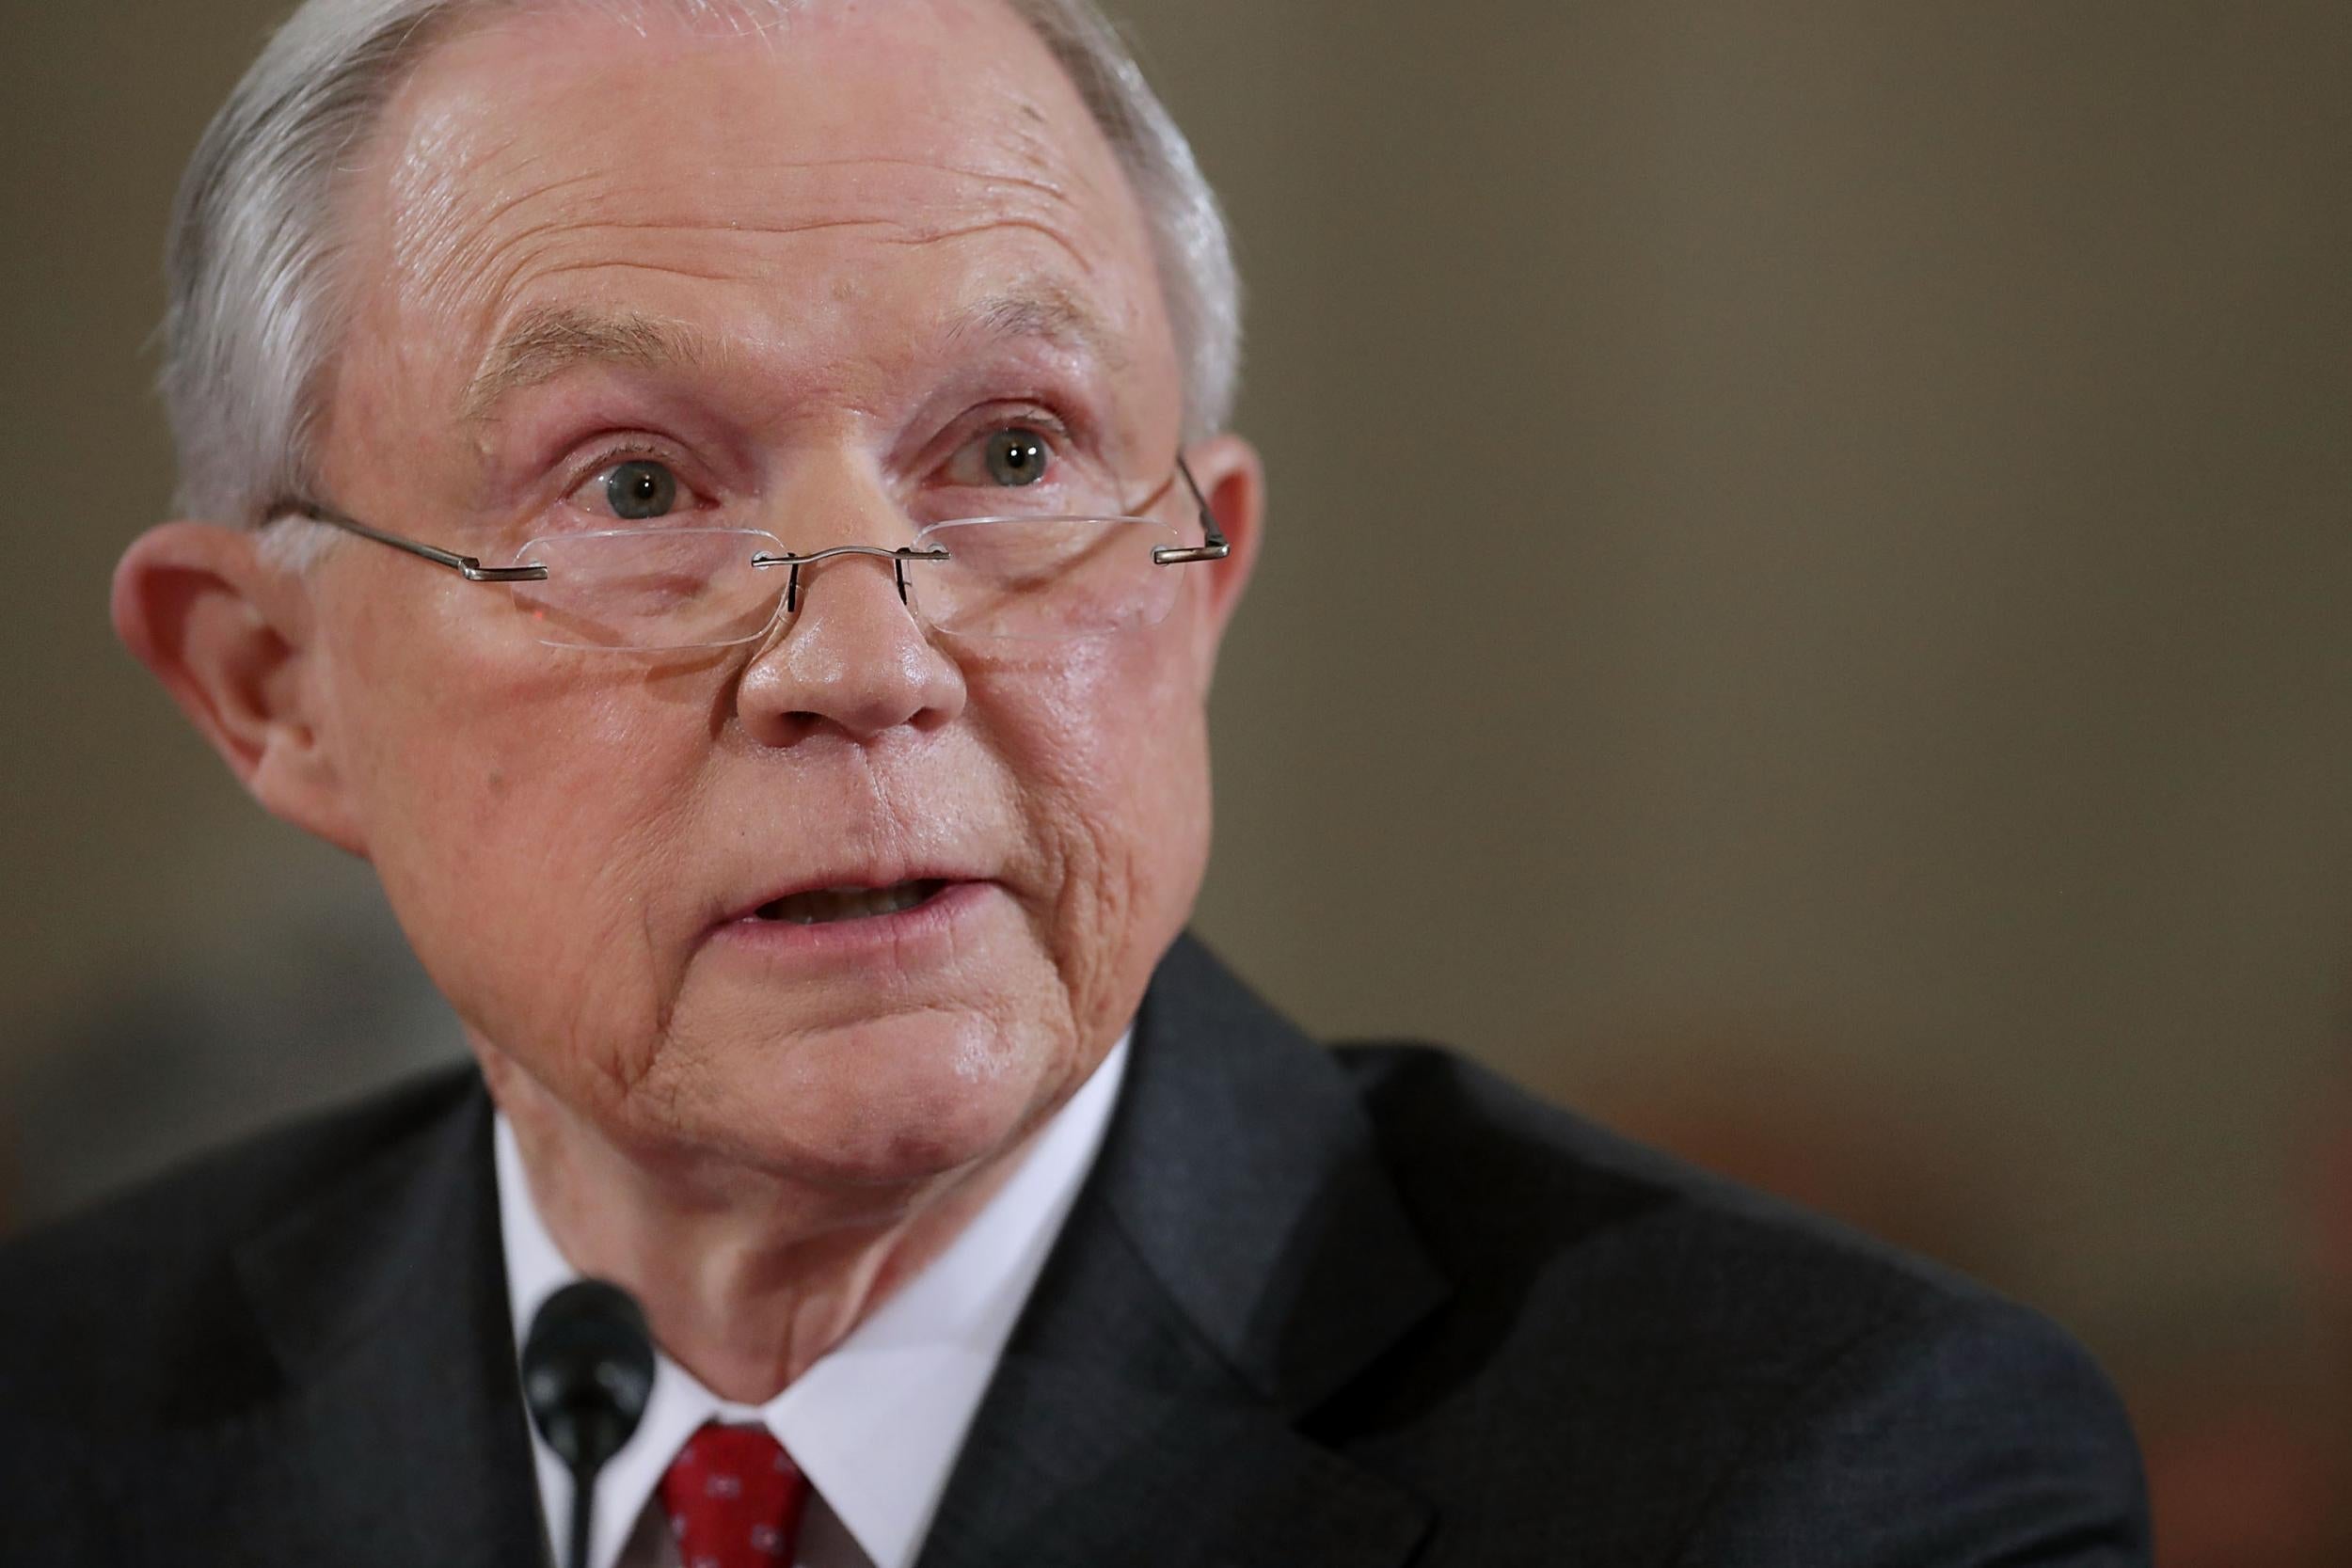 Mr Sessions said accusations of racism were 'damnably false charges'